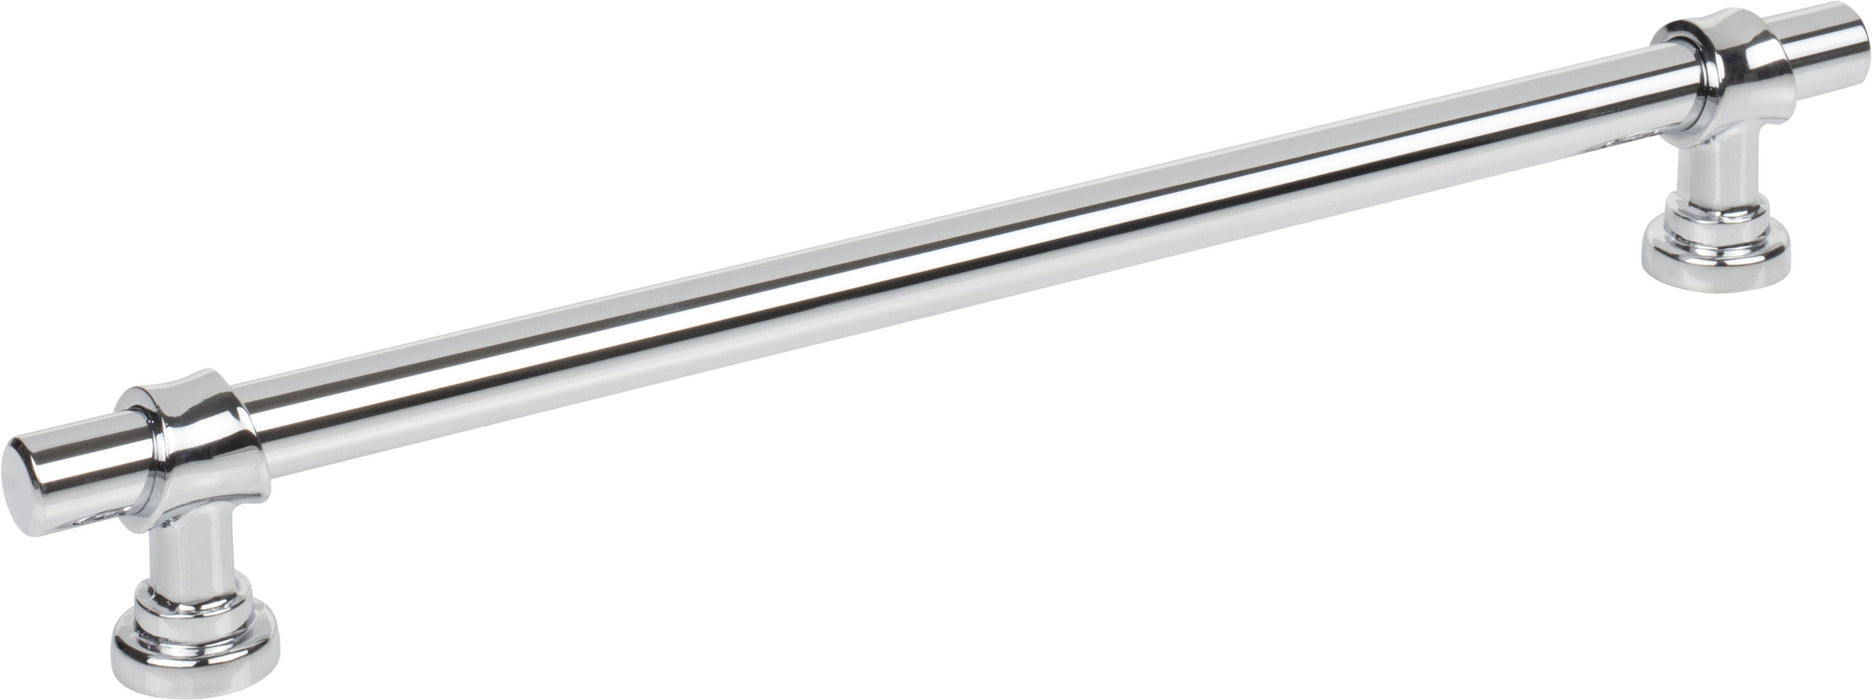 Top Knobs M2744 8-13/16in (224mm) Bit Pull Polished Chrome - KnobDepot